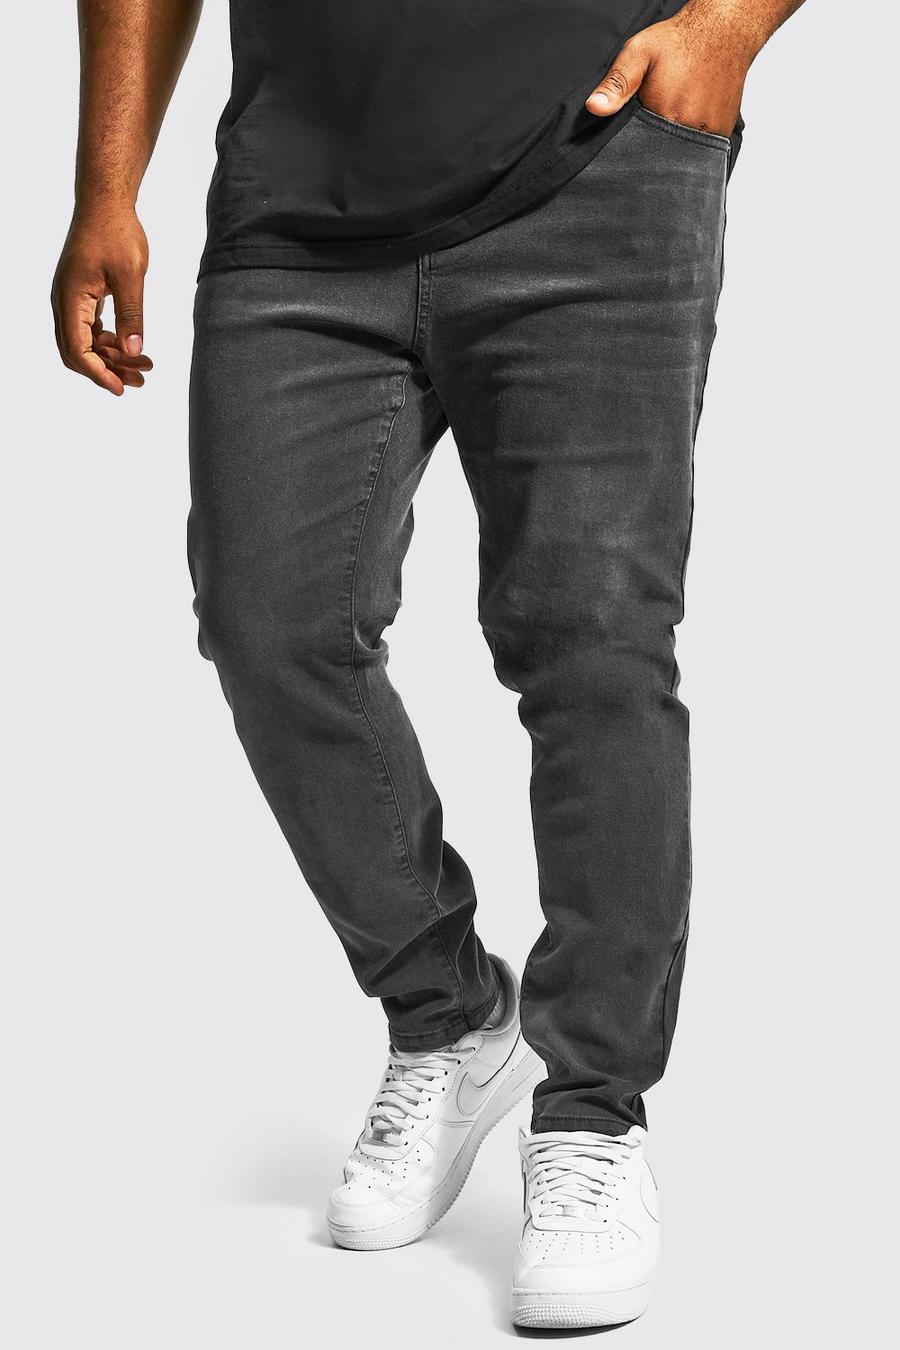 Jeans Plus Size Skinny Fit in Stretch in poliestere riciclato, Charcoal grigio